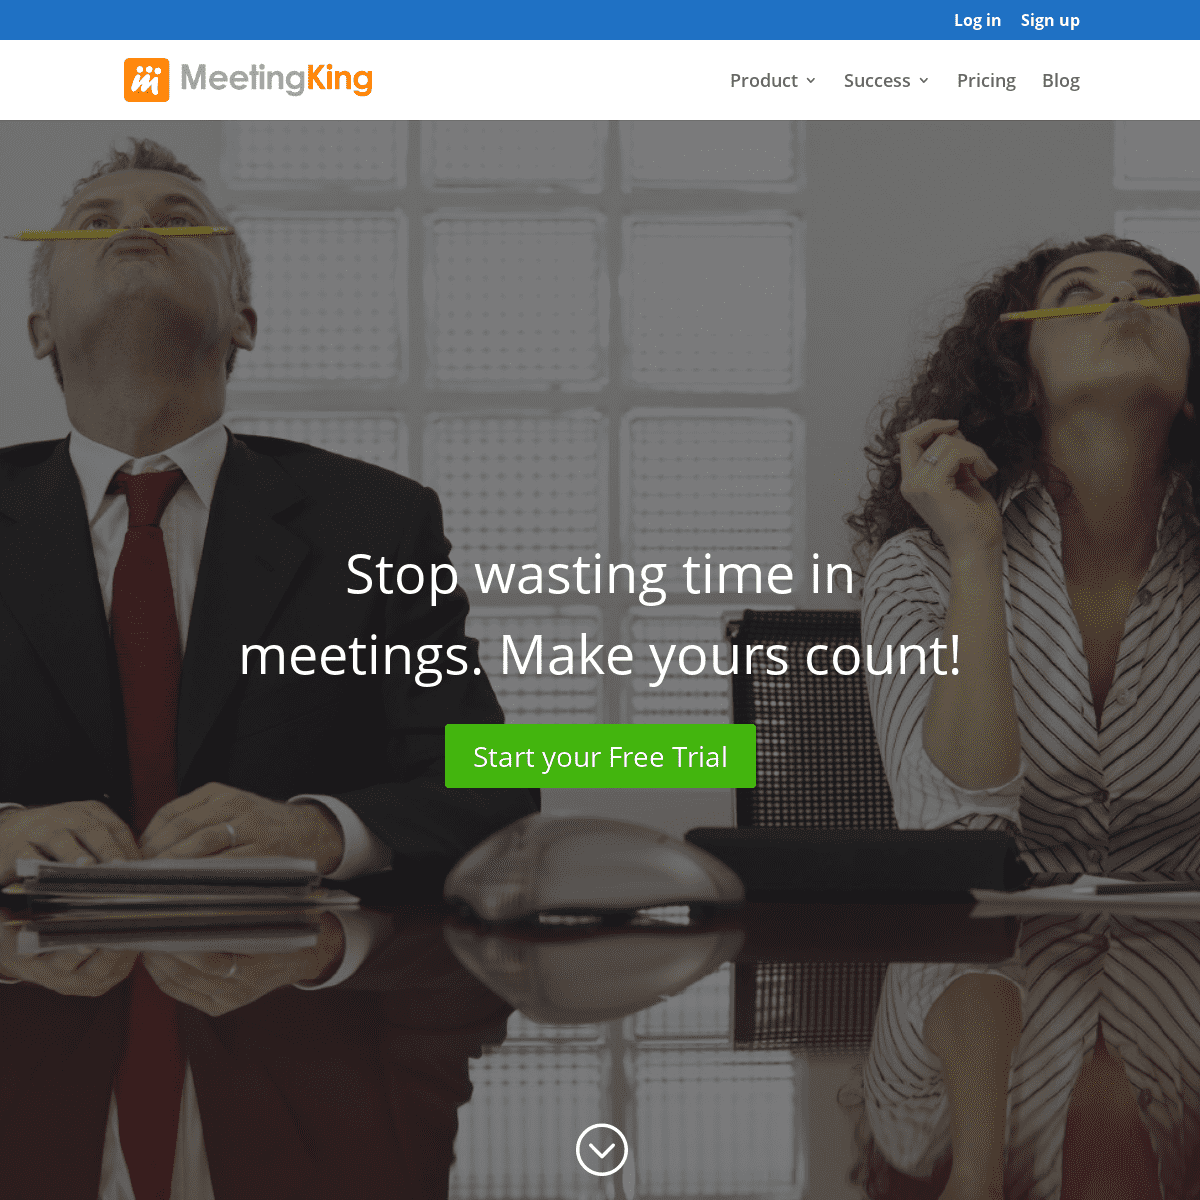 A complete backup of meetingking.com